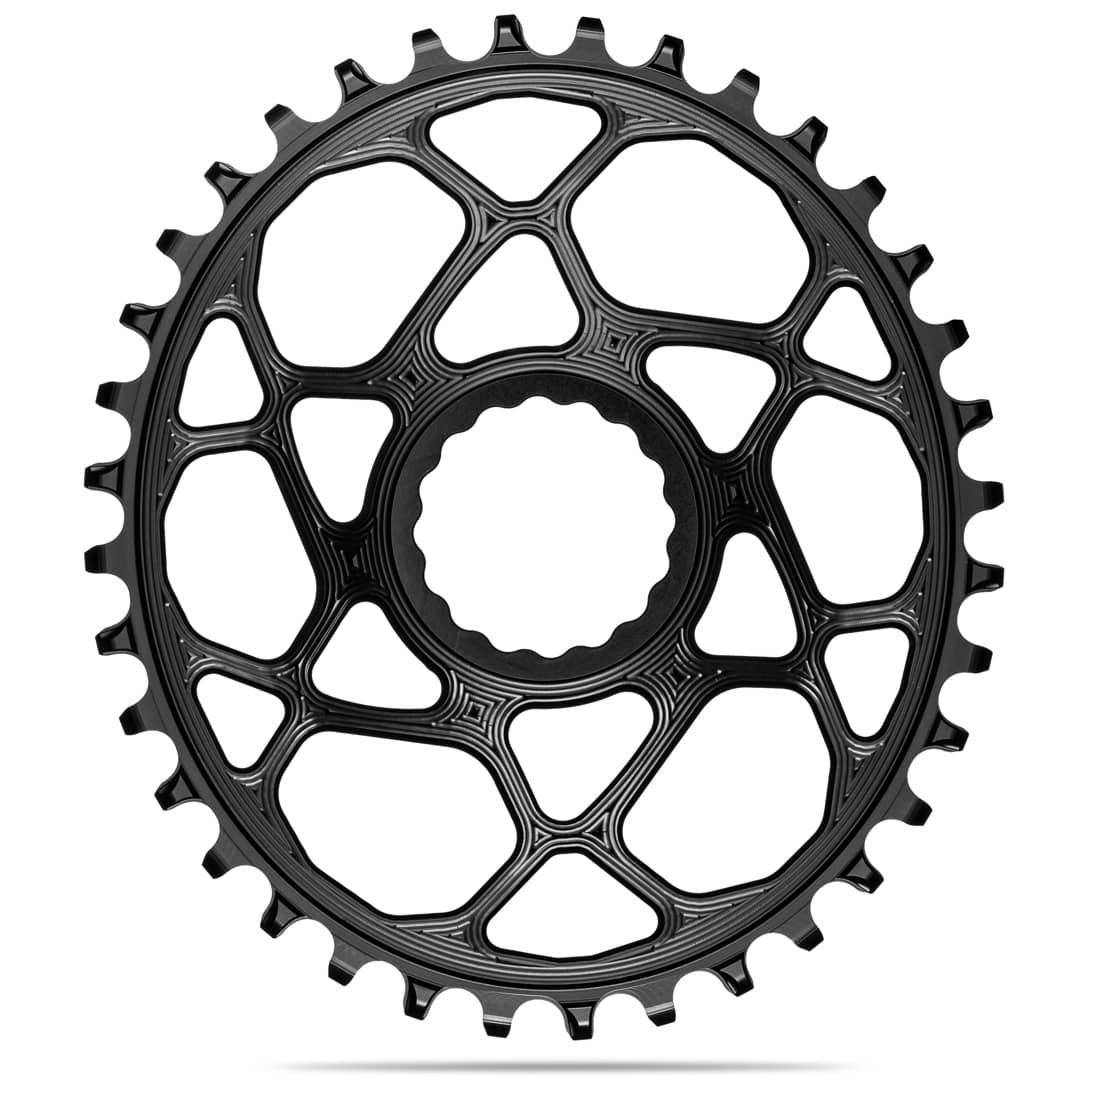 absoluteblack OVAL BOOST narrow wide direct mount cinch chainring for Race Face